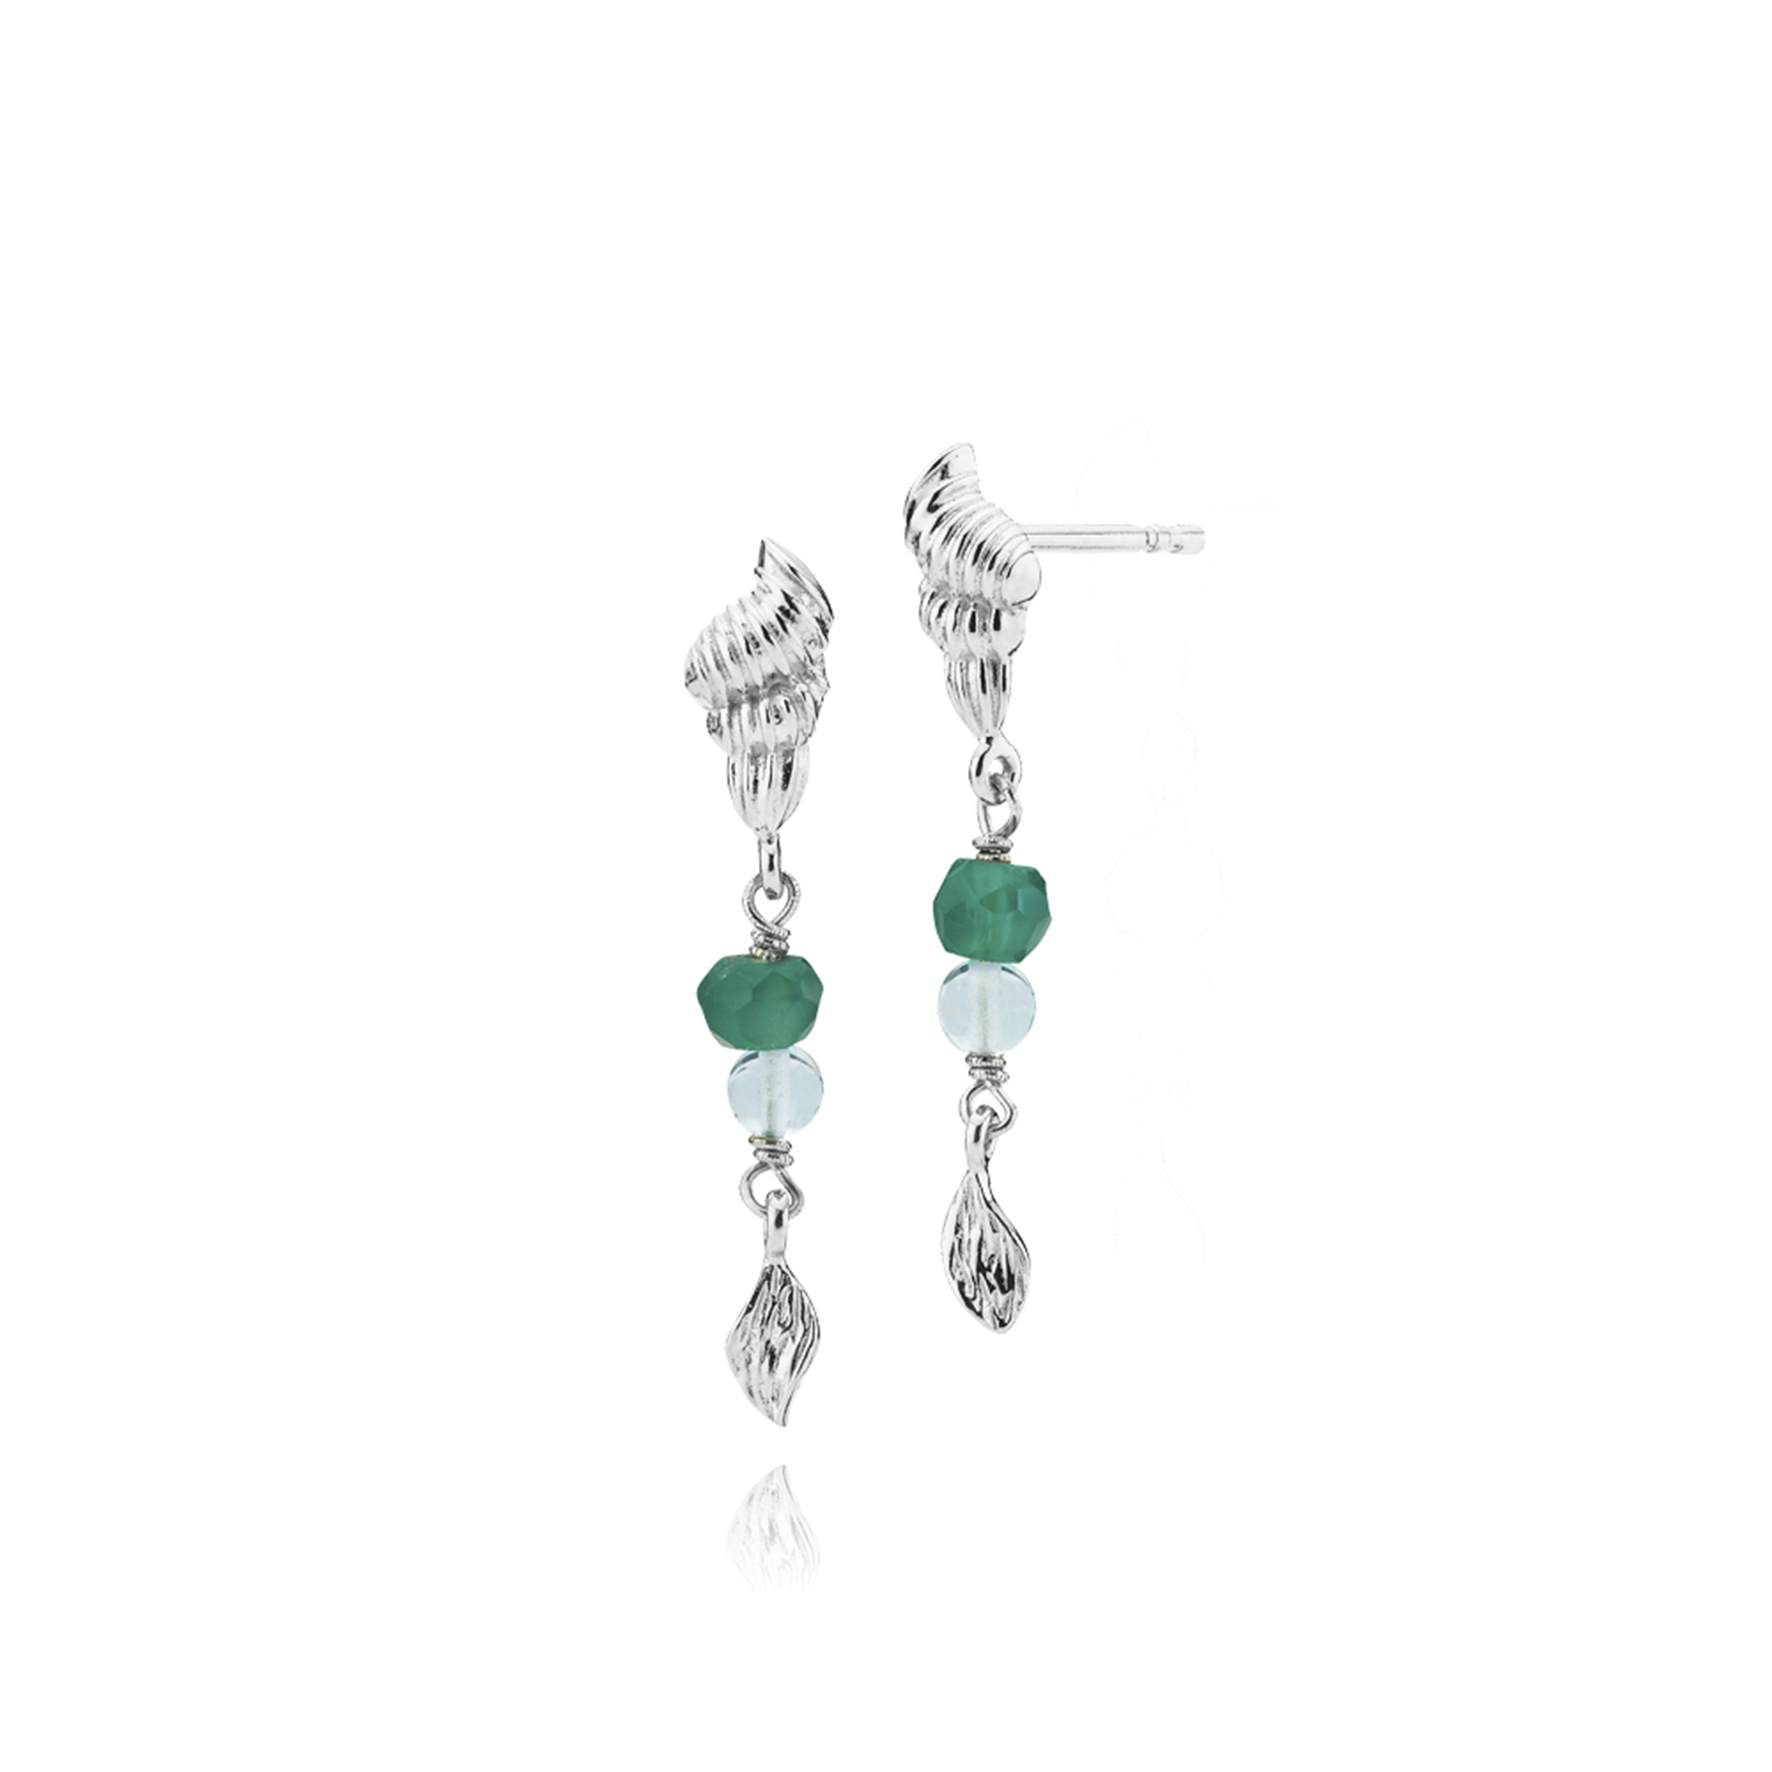 Kaia Earrings Green Onyx and Aqua Crystal von Sistie in Silber Sterling 925